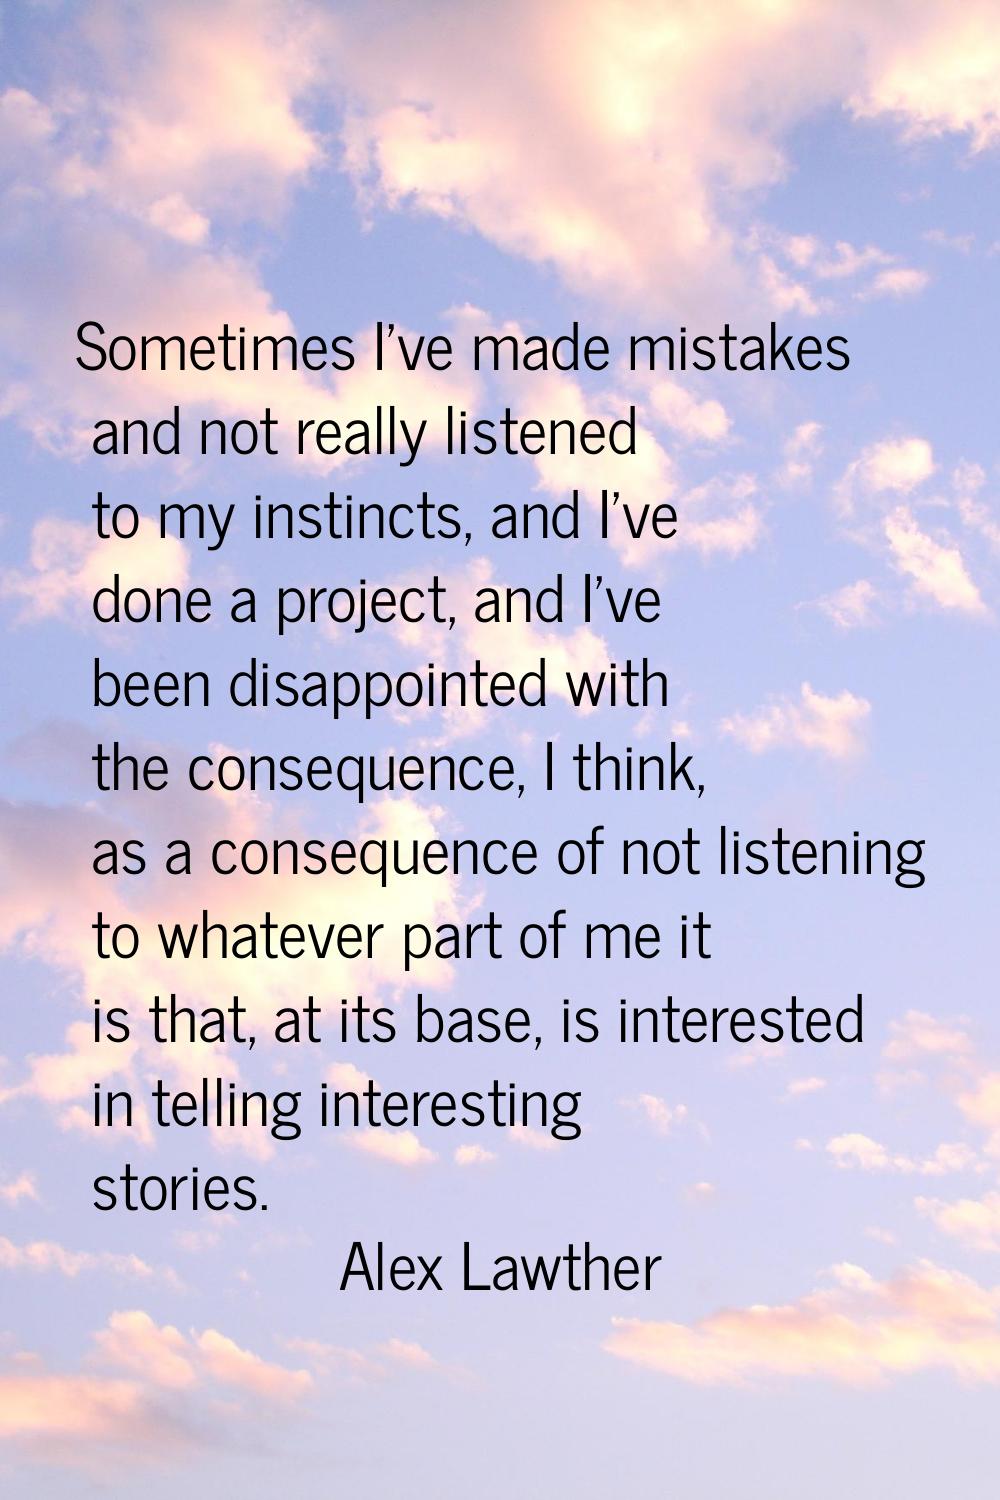 Sometimes I've made mistakes and not really listened to my instincts, and I've done a project, and 